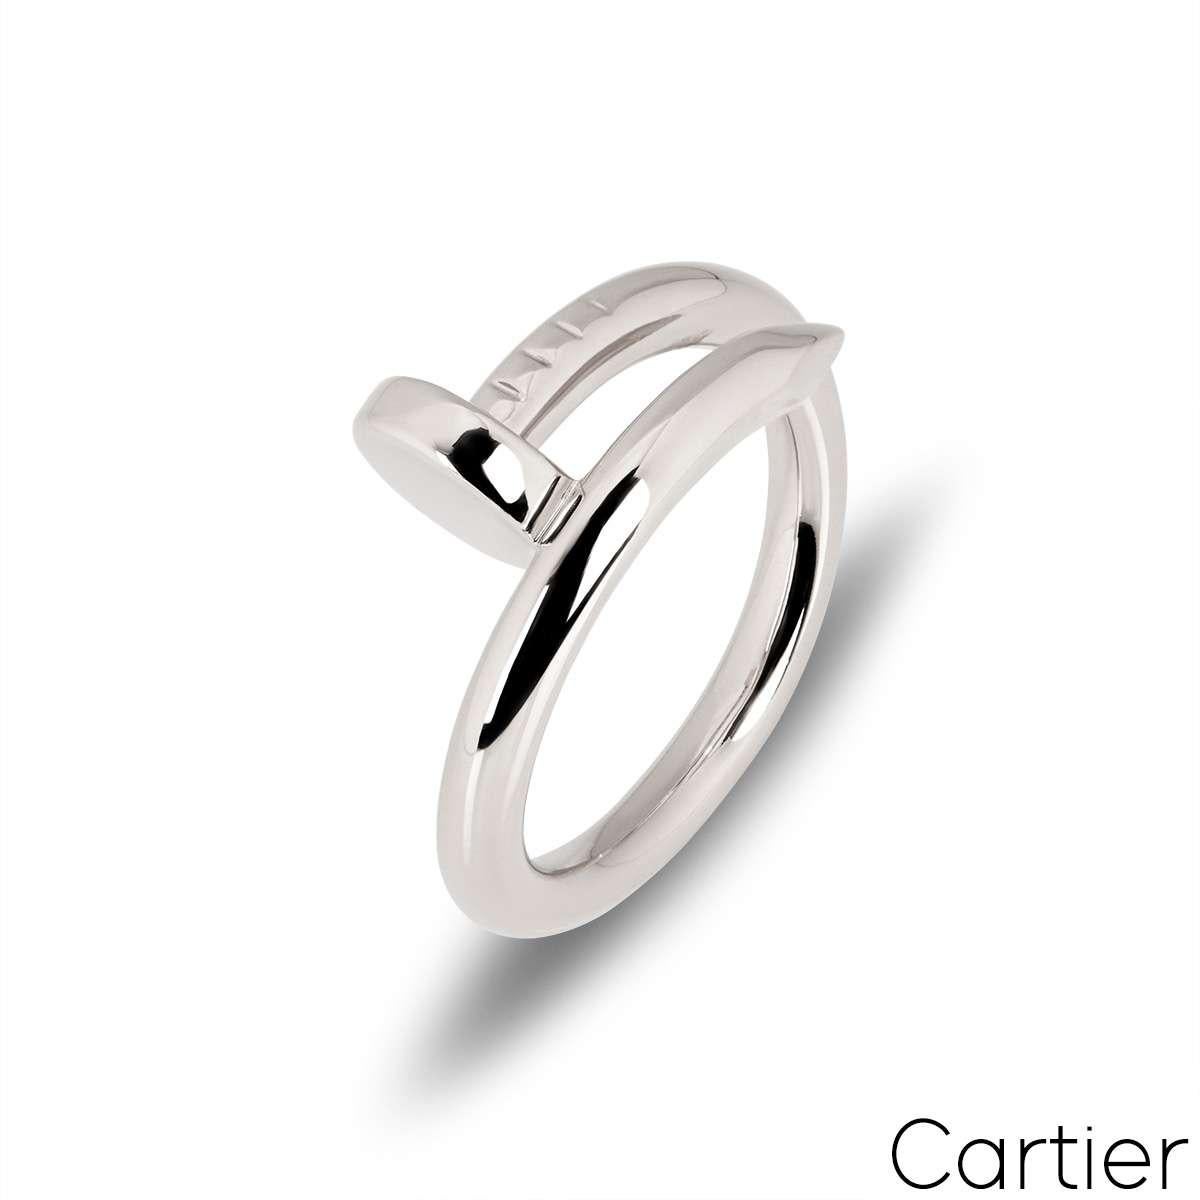 An 18k white gold Juste un Clou ring from Cartier. This modern ring is wrapped around with a nail head at one tip and a nail end at the other. A size UK P - EU 56, this ring has a gross weight of 8.11 grams.

Comes complete with a RichDiamonds